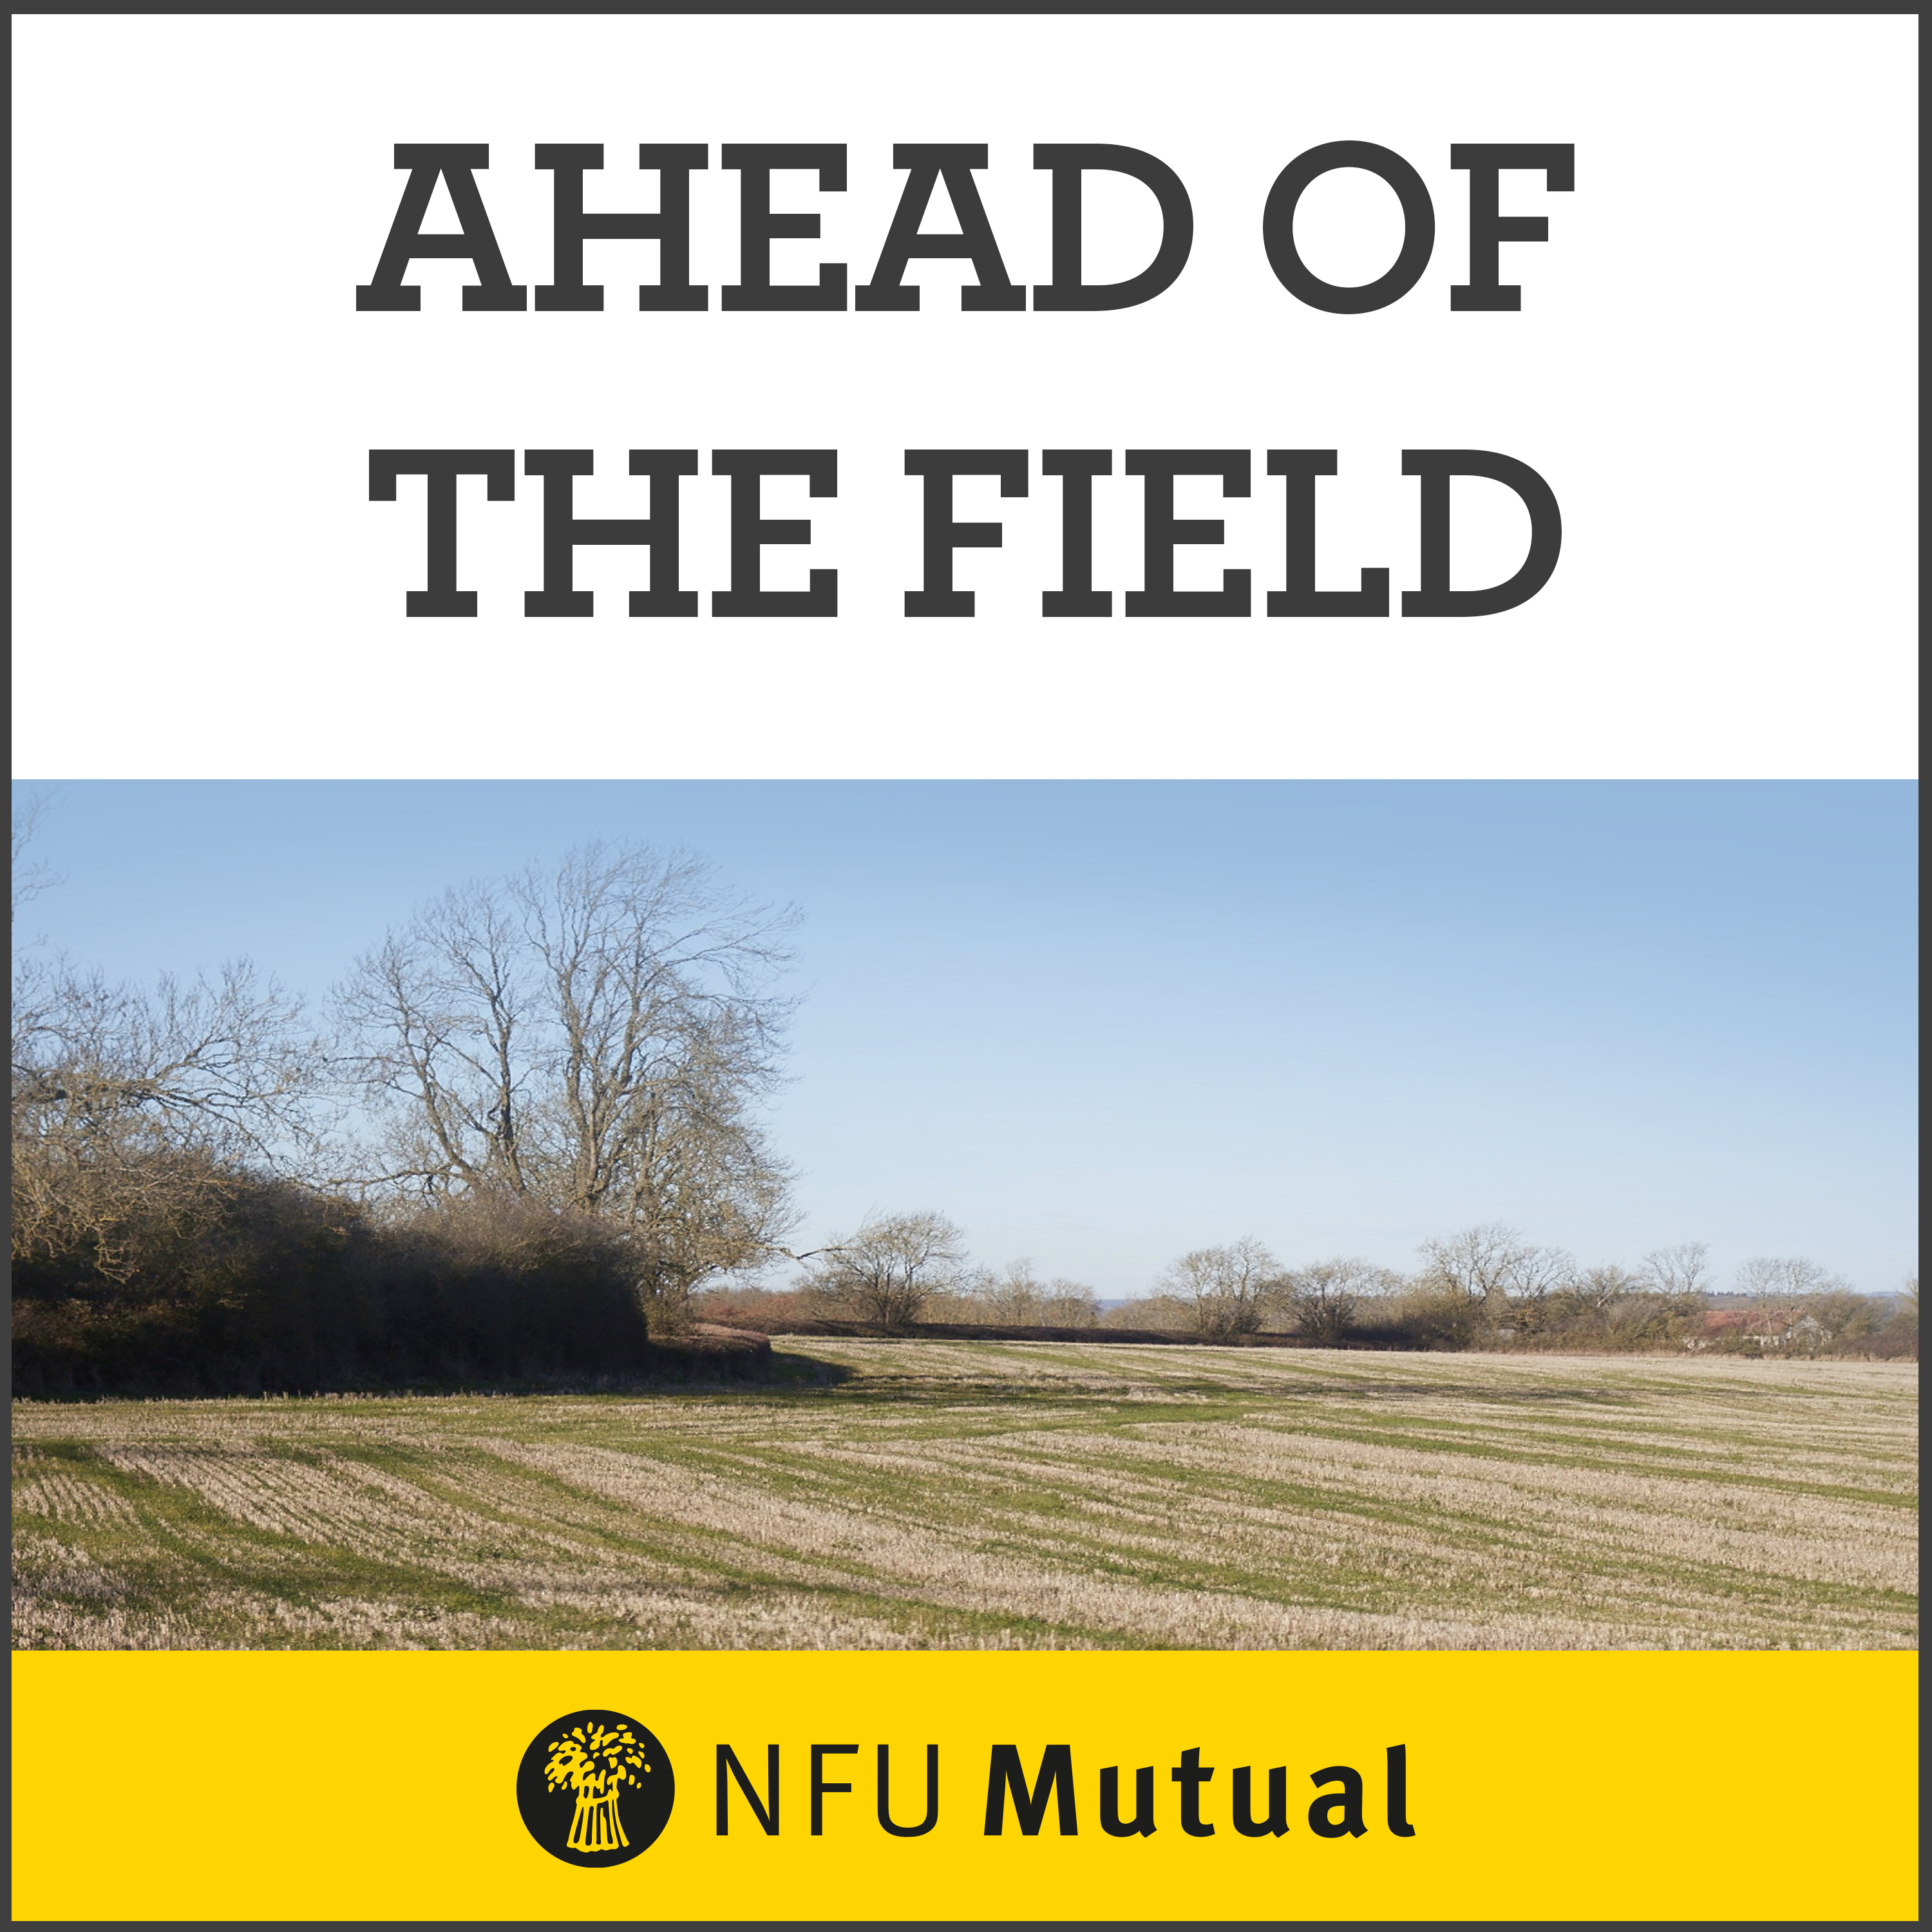 Creating super-relevant content for your community, with NFU Mutual